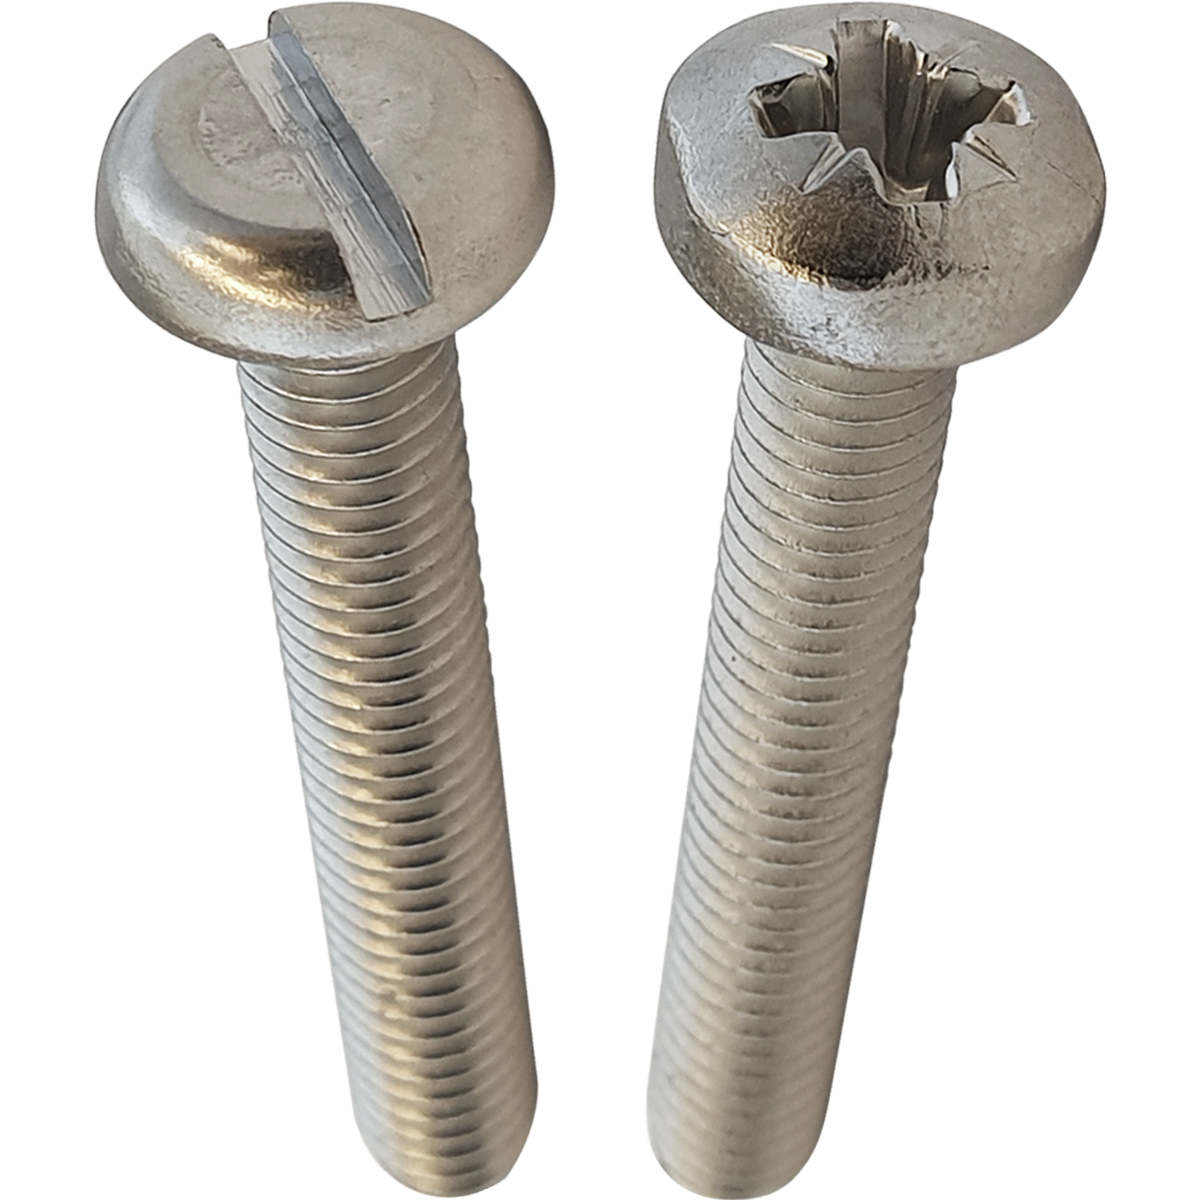 Pan head machine screws in a variety of sizes with slotted and Pozi recesses.